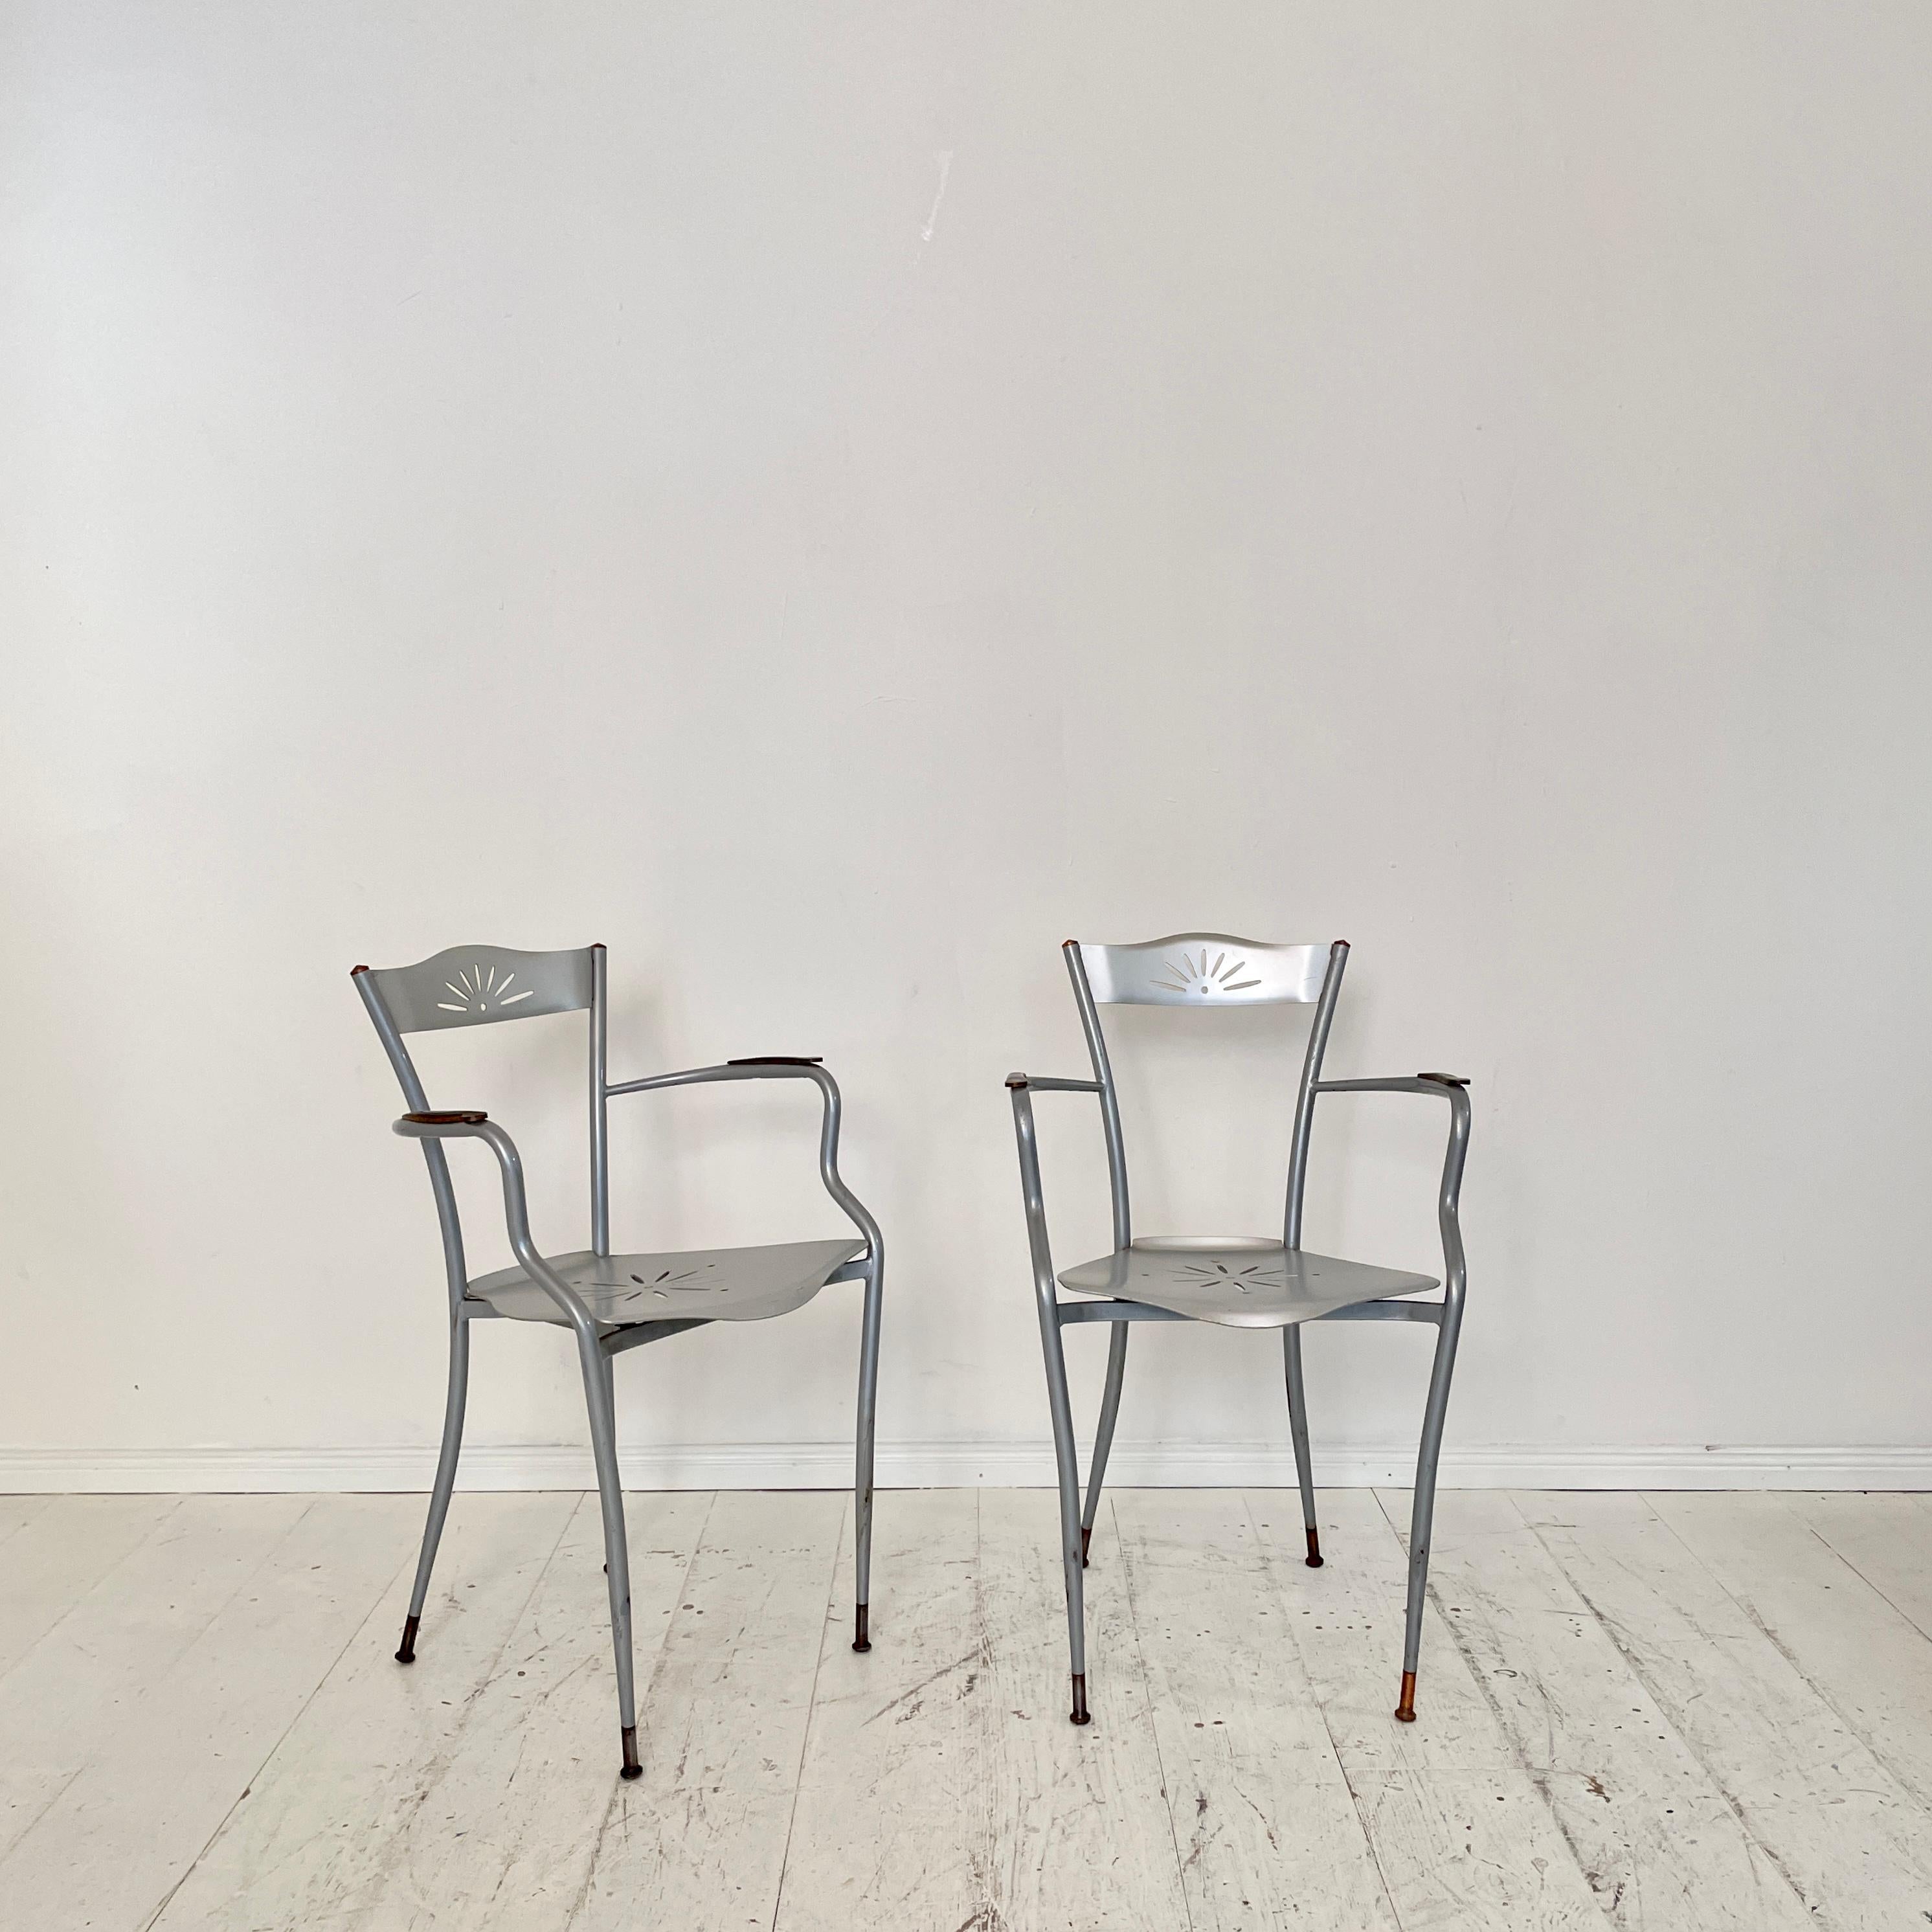 This beautiful Pair French Armchairs in Metal and Copper where made around 1980.
A unique piece which is a great eye-catcher for your antique, modern, space age or mid-century interior.
If you have any more questions we are very happy to help and